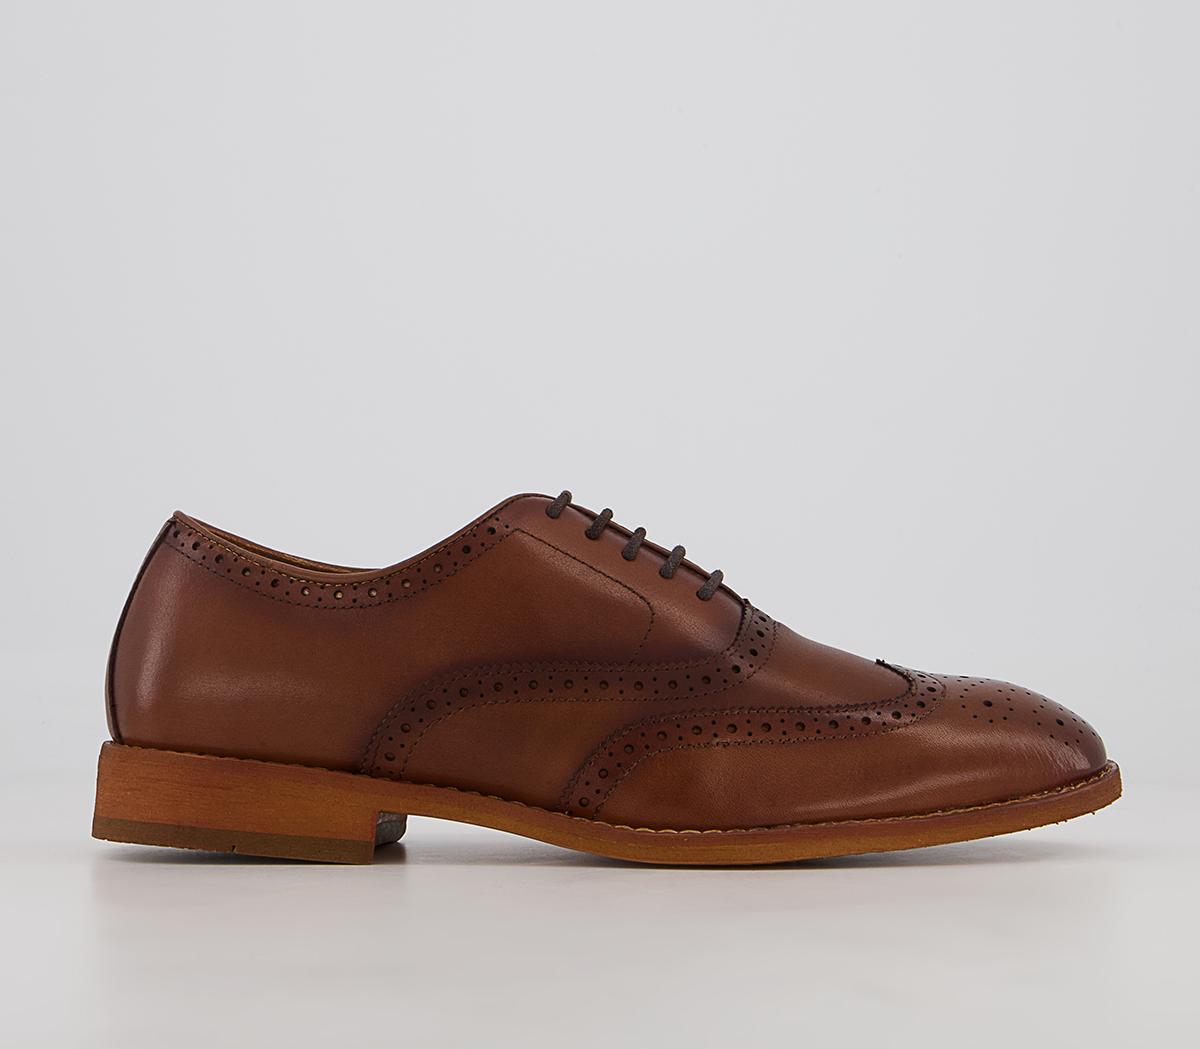 OFFICEMeanest Oxford BroguesTan Leather